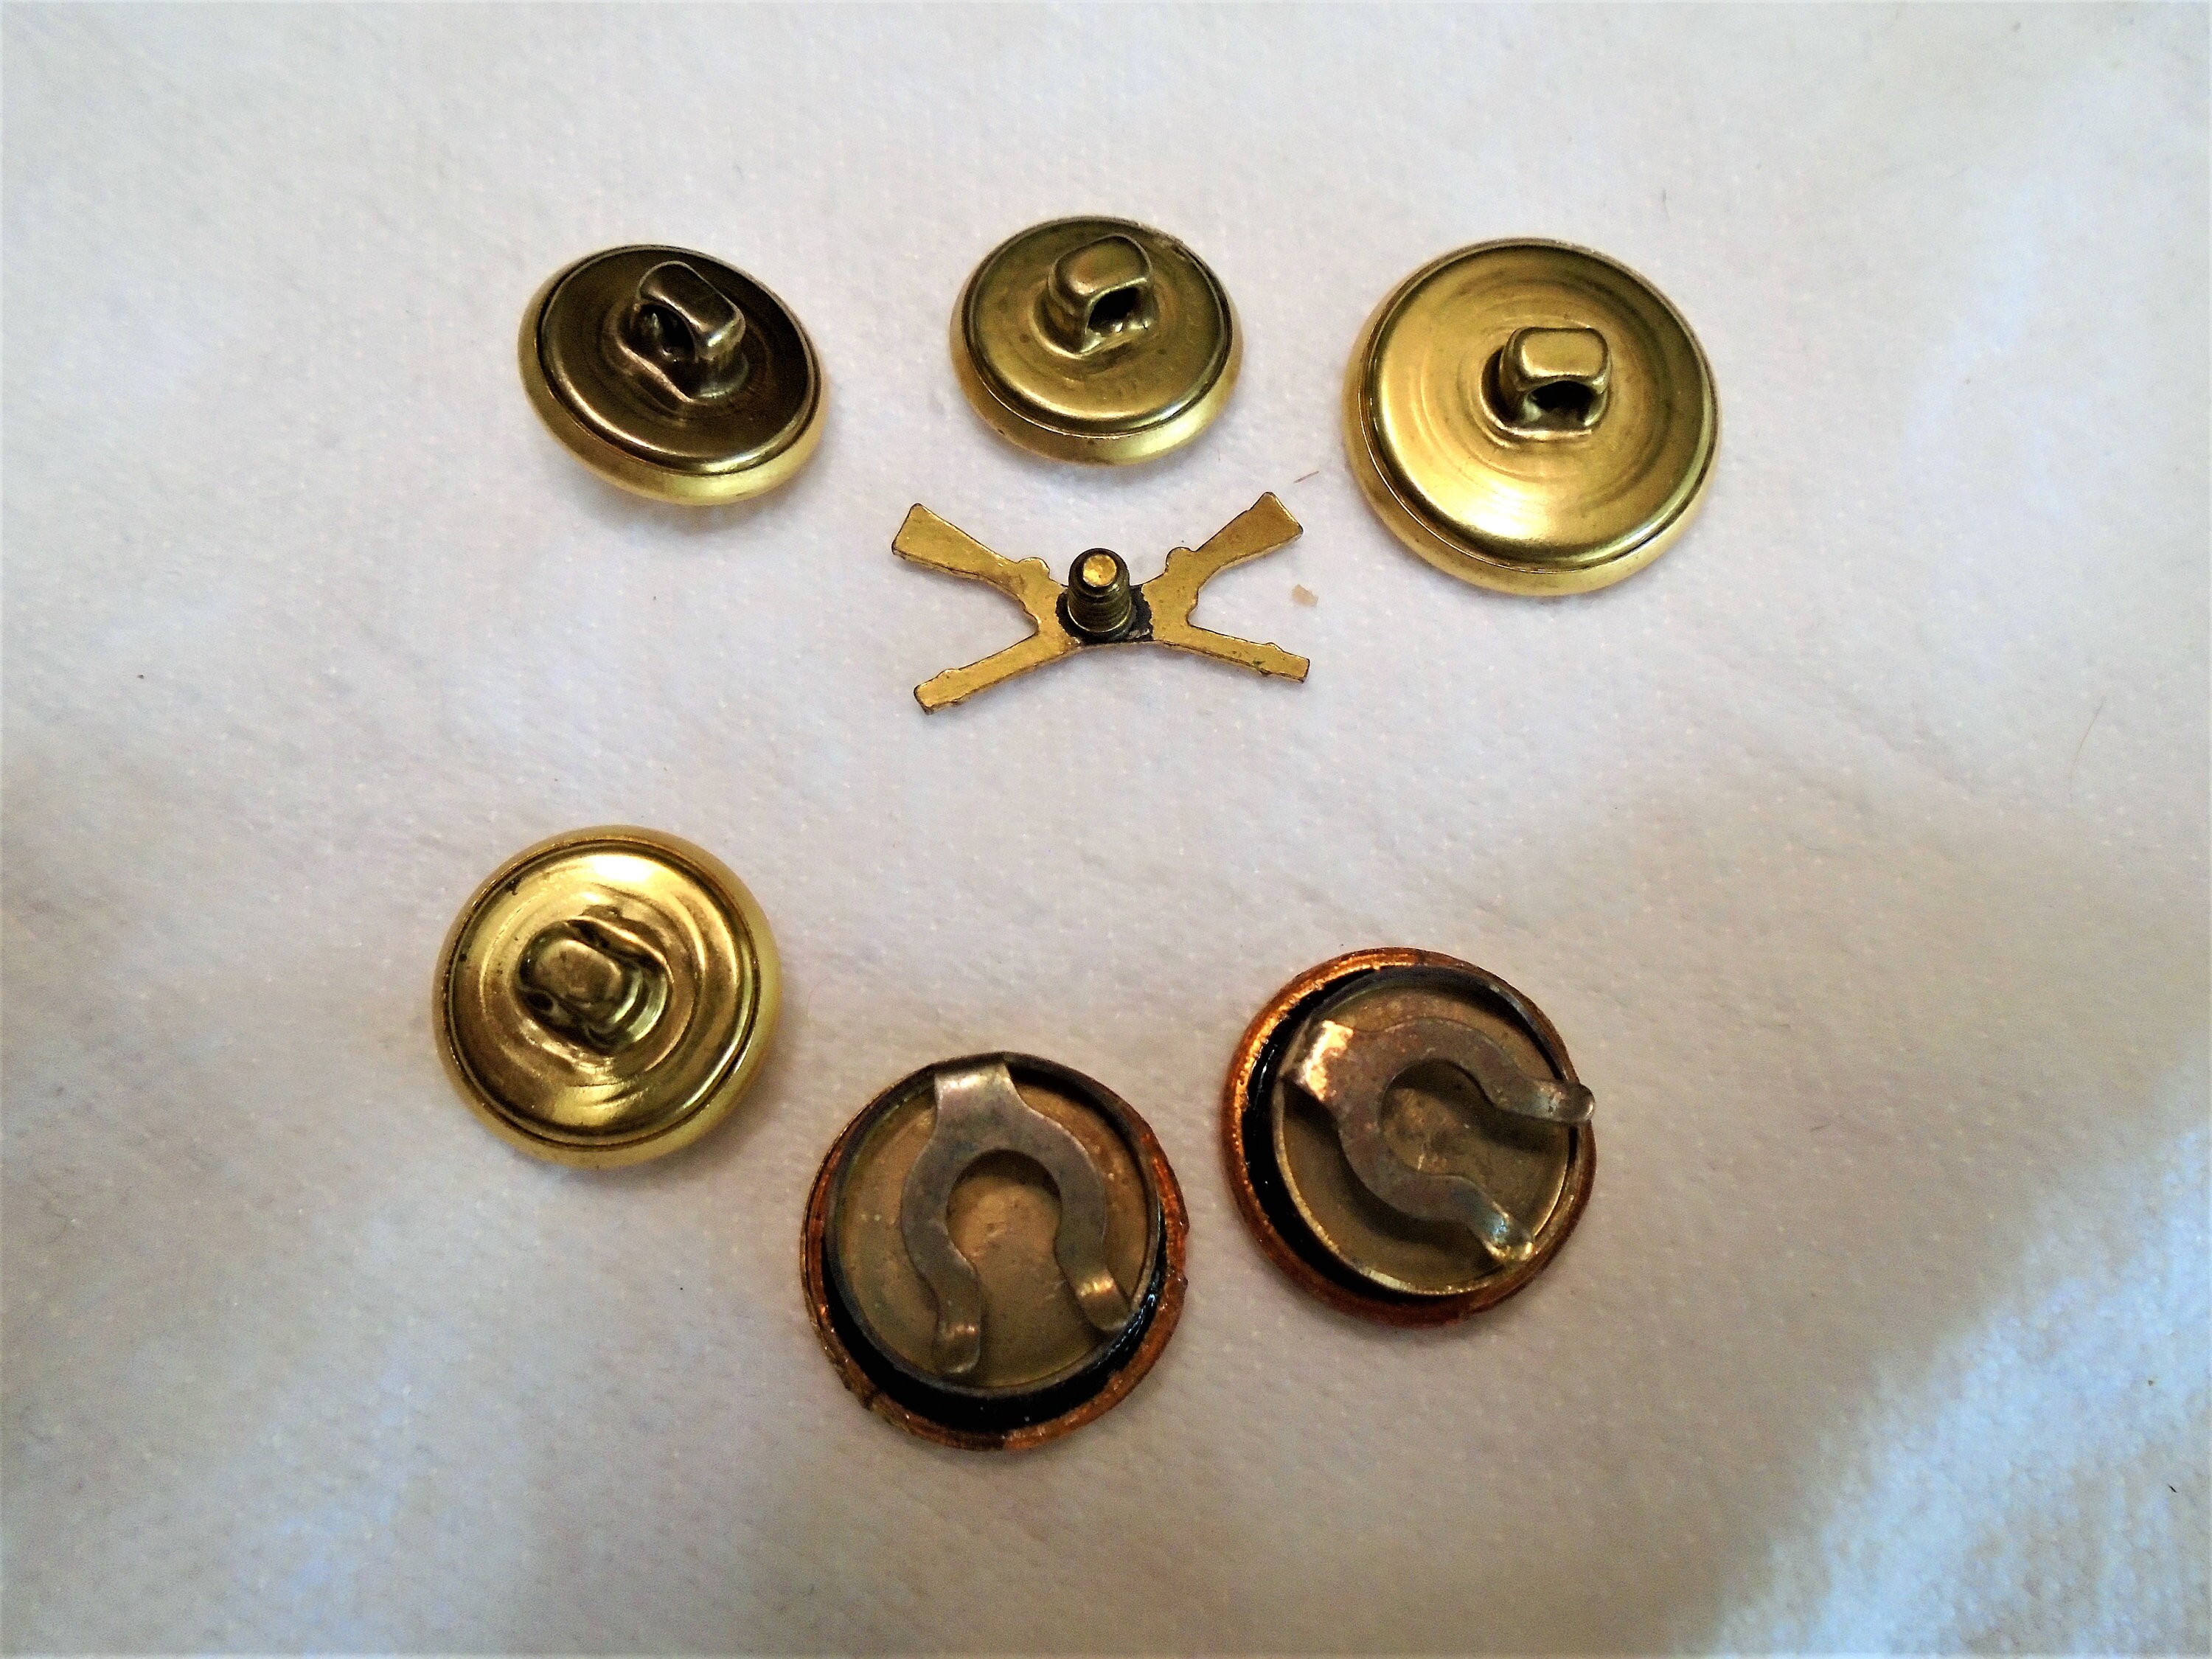 Military Button Cover 